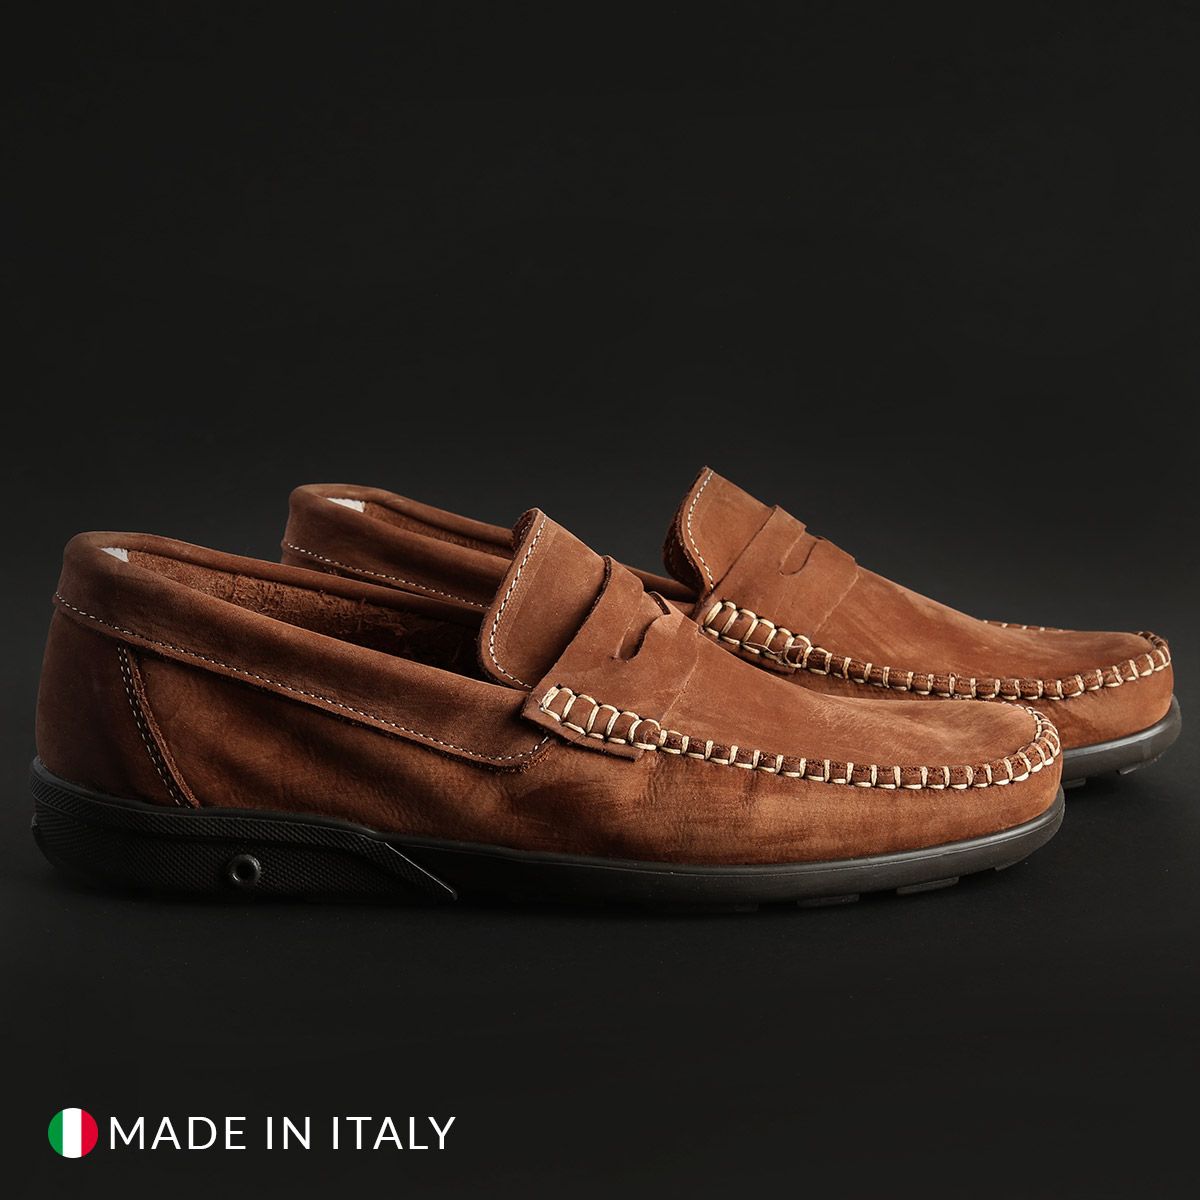 Made in: Italy <br> Gender: Man <br> Type: Loafers <br> Upper: leather <br> Internal lining: leather <br> Sole: rubber <br> Details: square toe